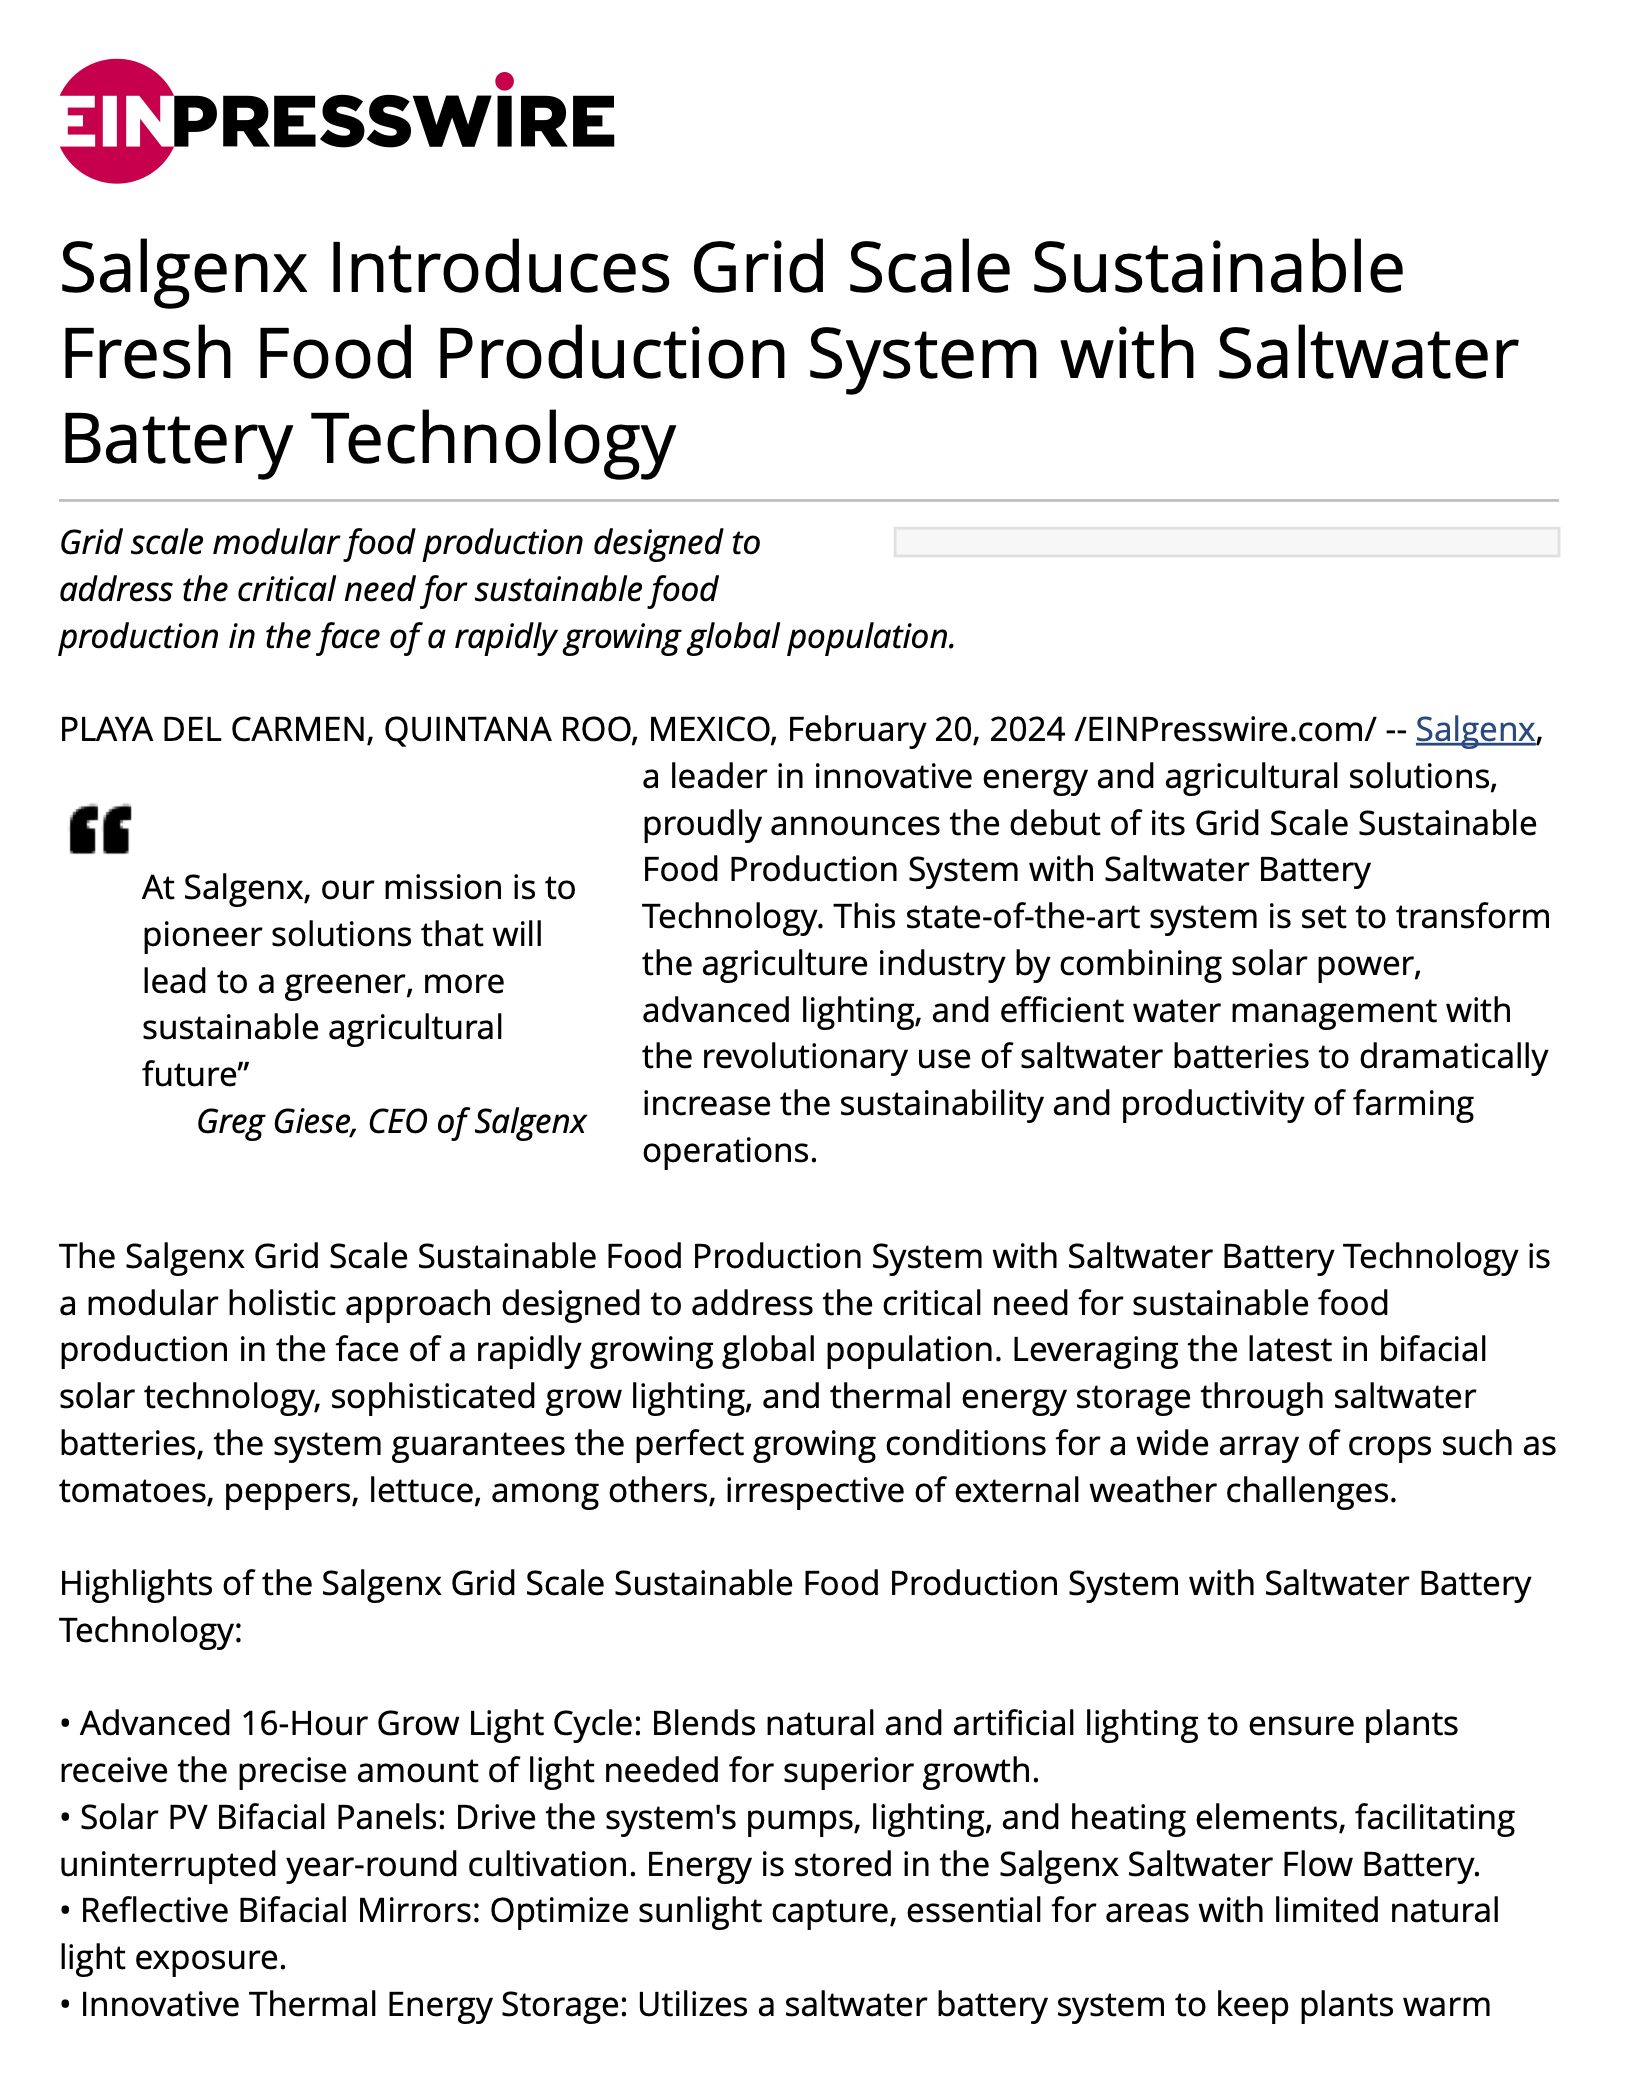 Salgenx Introduces Grid Scale Sustainable Fresh Food Production System with Saltwater Battery Technology